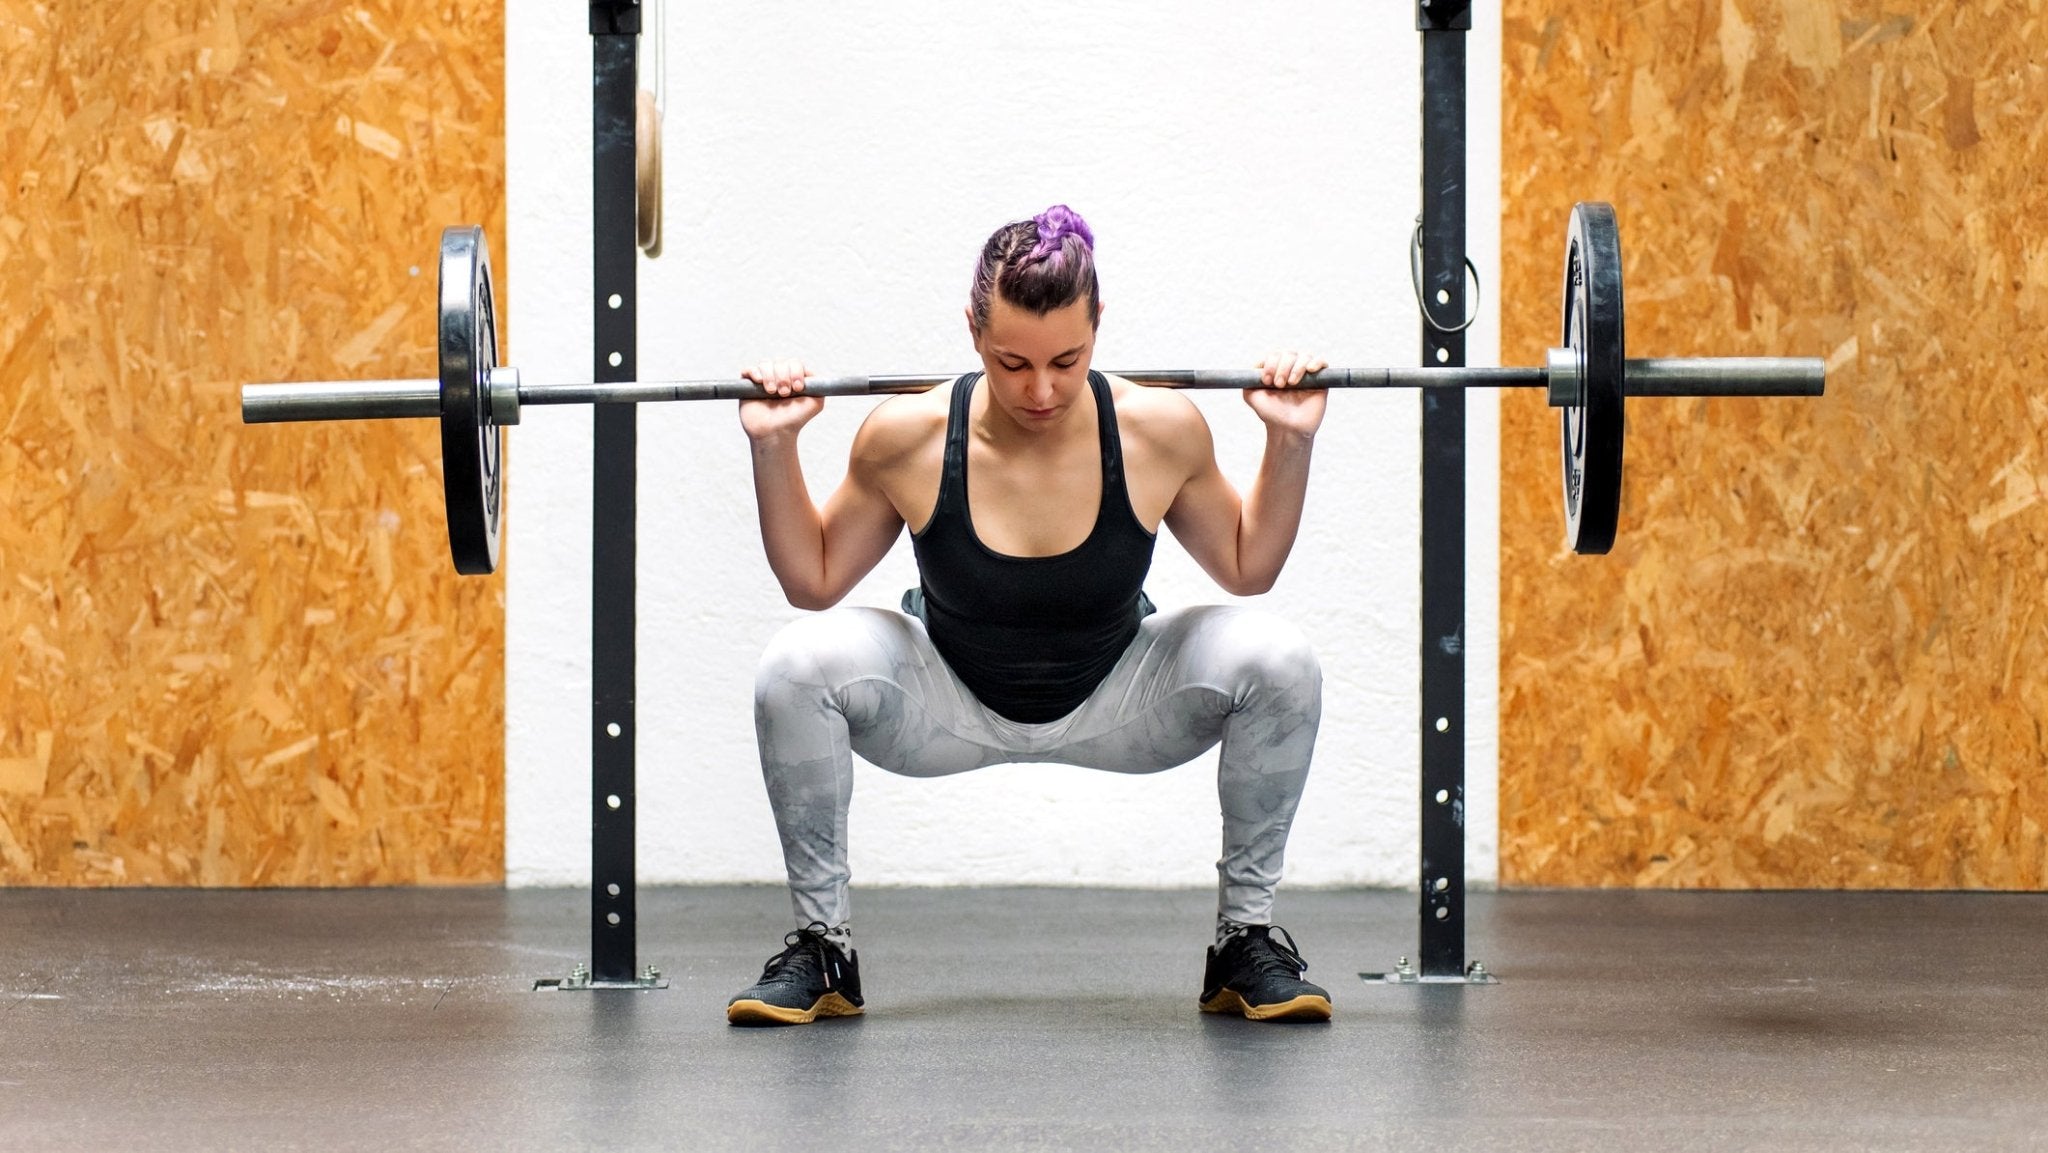 How to Wear a Weightlifting Belt When Performing a Back Squat - Gunsmith Fitness